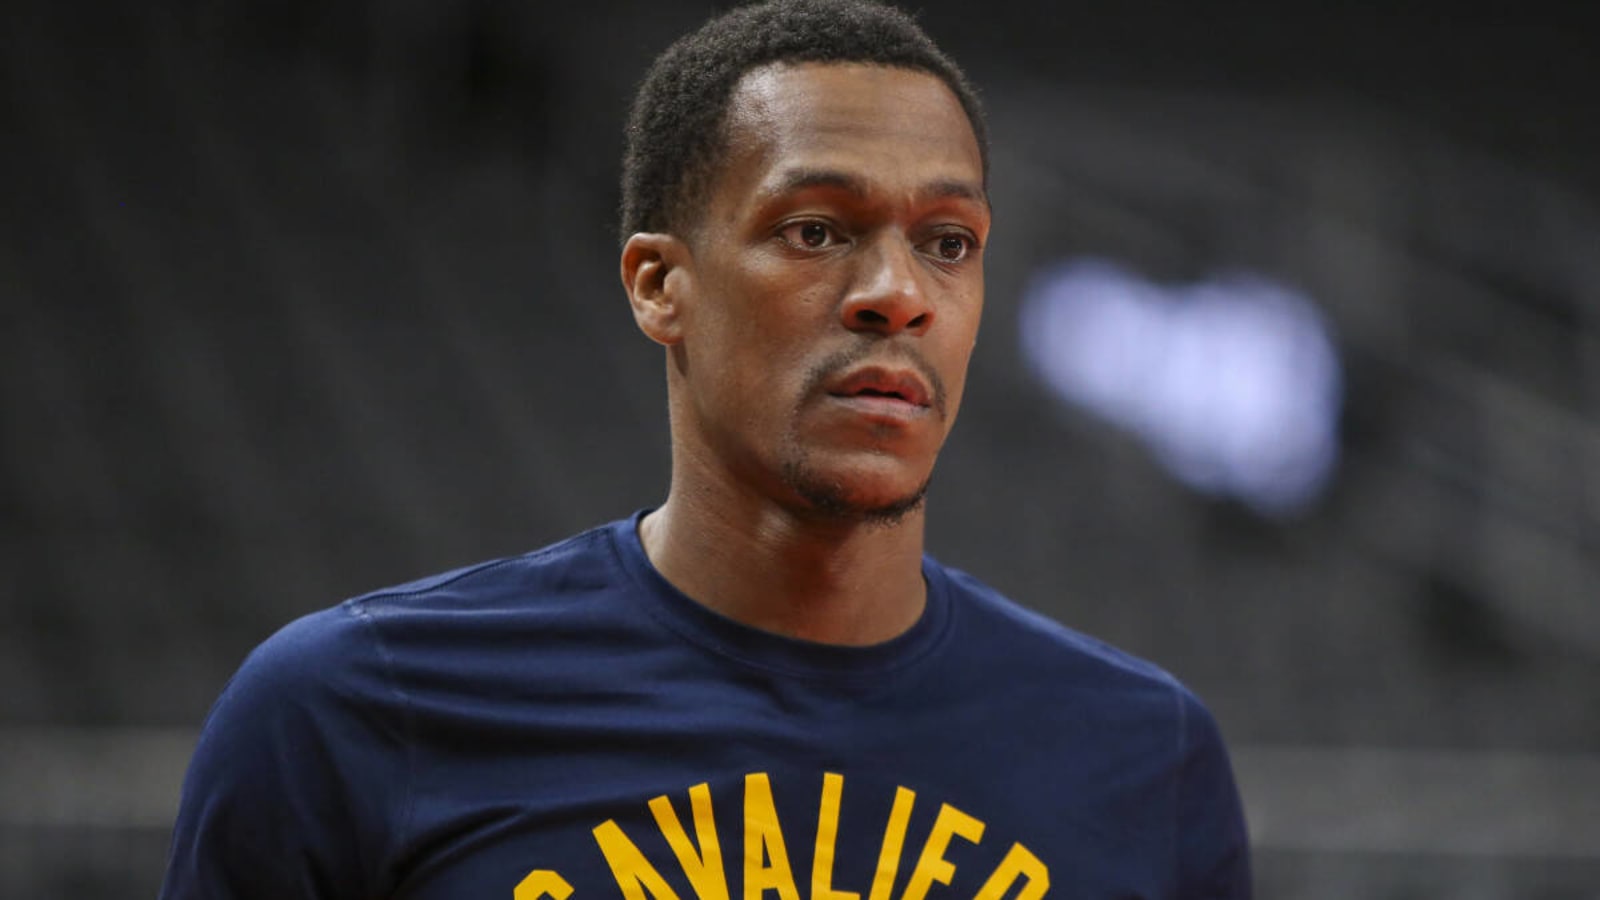 LeBron James On Why Rajon Rondo Is Not Coaching In The NBA: 'Who Wants To Deal With These Rich Entitled Guys?'